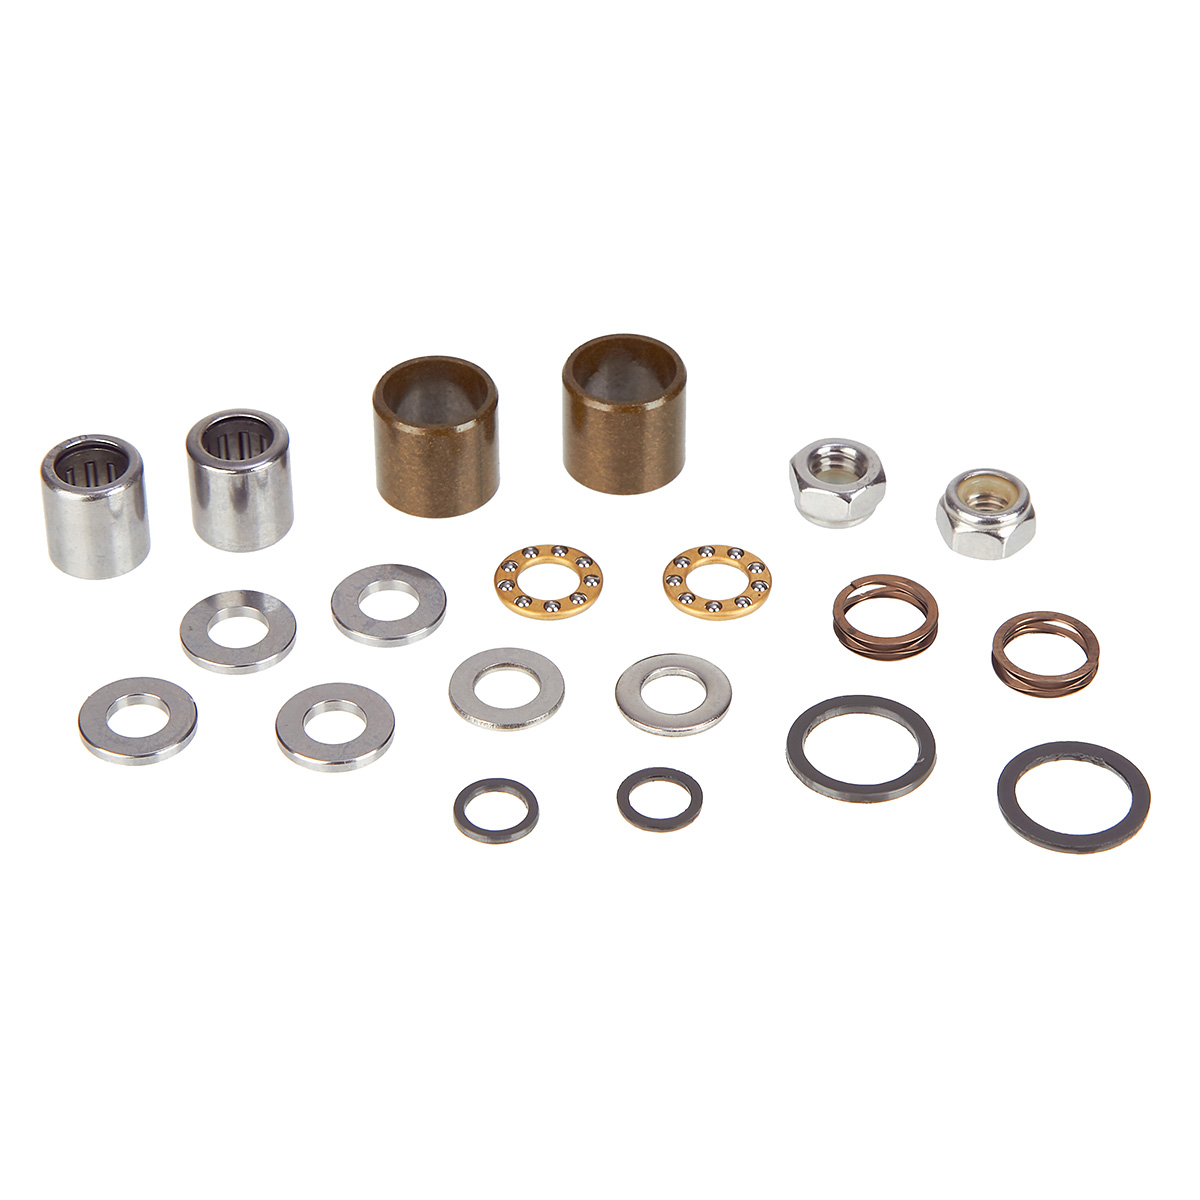 HT Components Pedal Bearing Kit  for T1/M1 Pedals